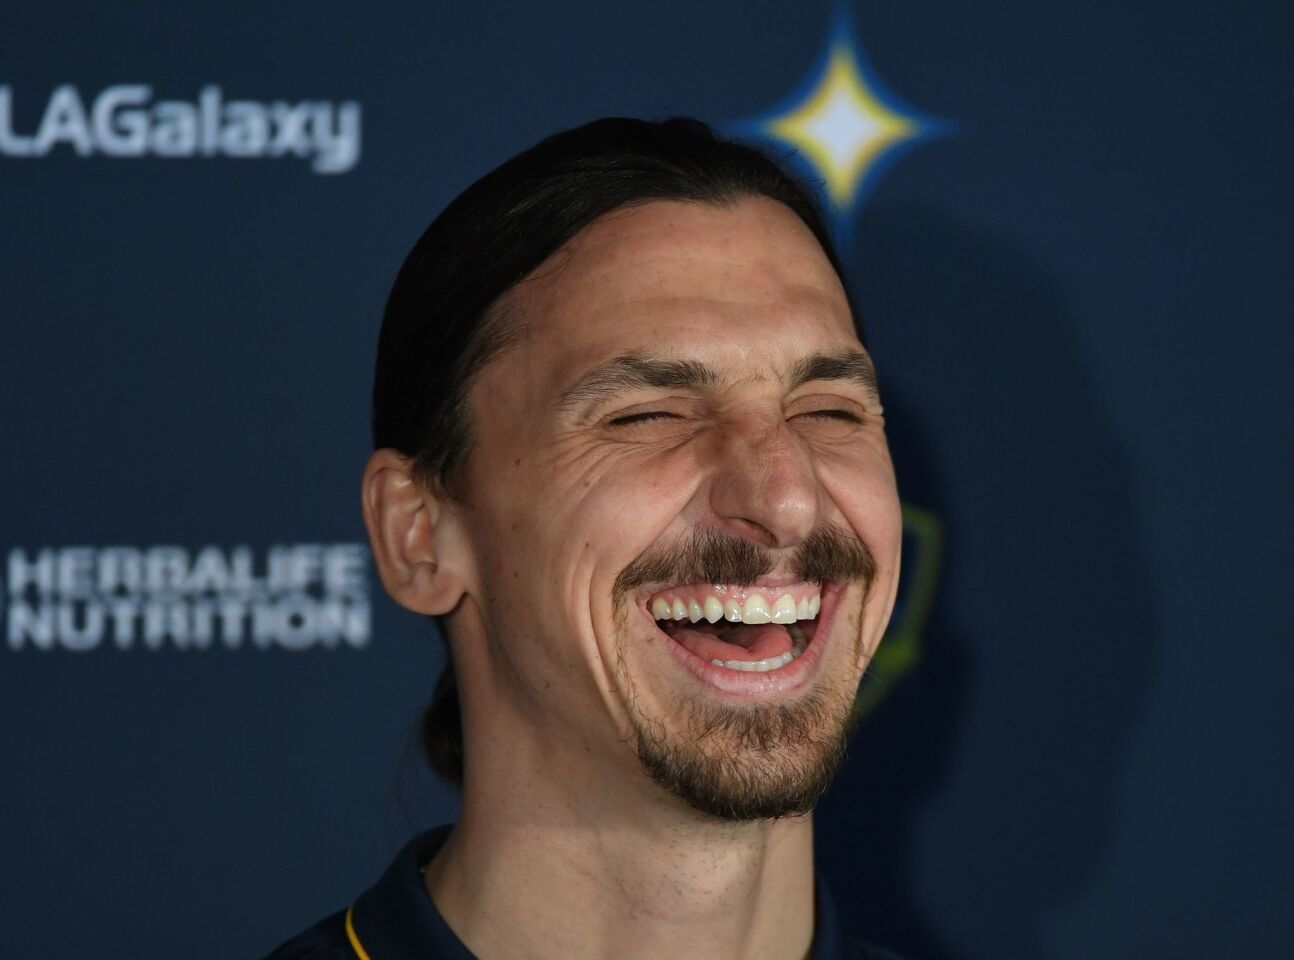 LA Galaxy footballer Zlatan Ibrahimovic laughs during his first press conference for the club in Los Angeles, California, on March 30, 2018. The 36-year-old Swedish striker's move to MLS from Manchester United was confirmed last week, with Ibrahimovic swiftly vowing to reignite the Galaxy's fortunes after they finished bottom of the league last season. / AFP PHOTO / Mark RalstonMARK RALSTON/AFP/Getty Images ** OUTS - ELSENT, FPG, CM - OUTS * NM, PH, VA if sourced by CT, LA or MoD **